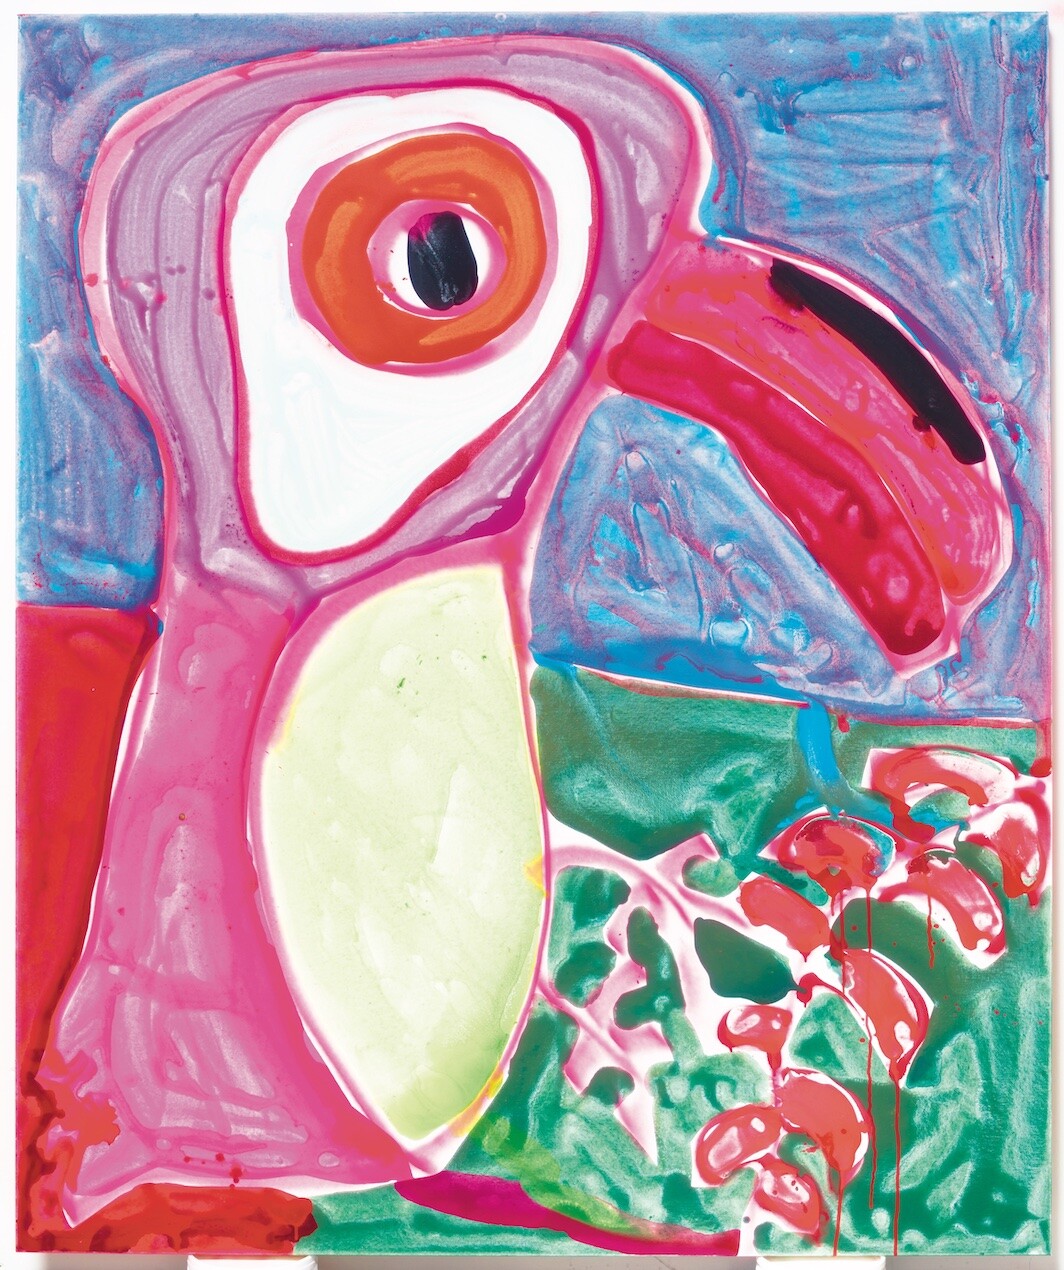 Katherine Bernhardt, Pink Parrot, 2017, acrylic and spray paint on canvas, 72 × 60". Courtesy: the artist and Canada, New York